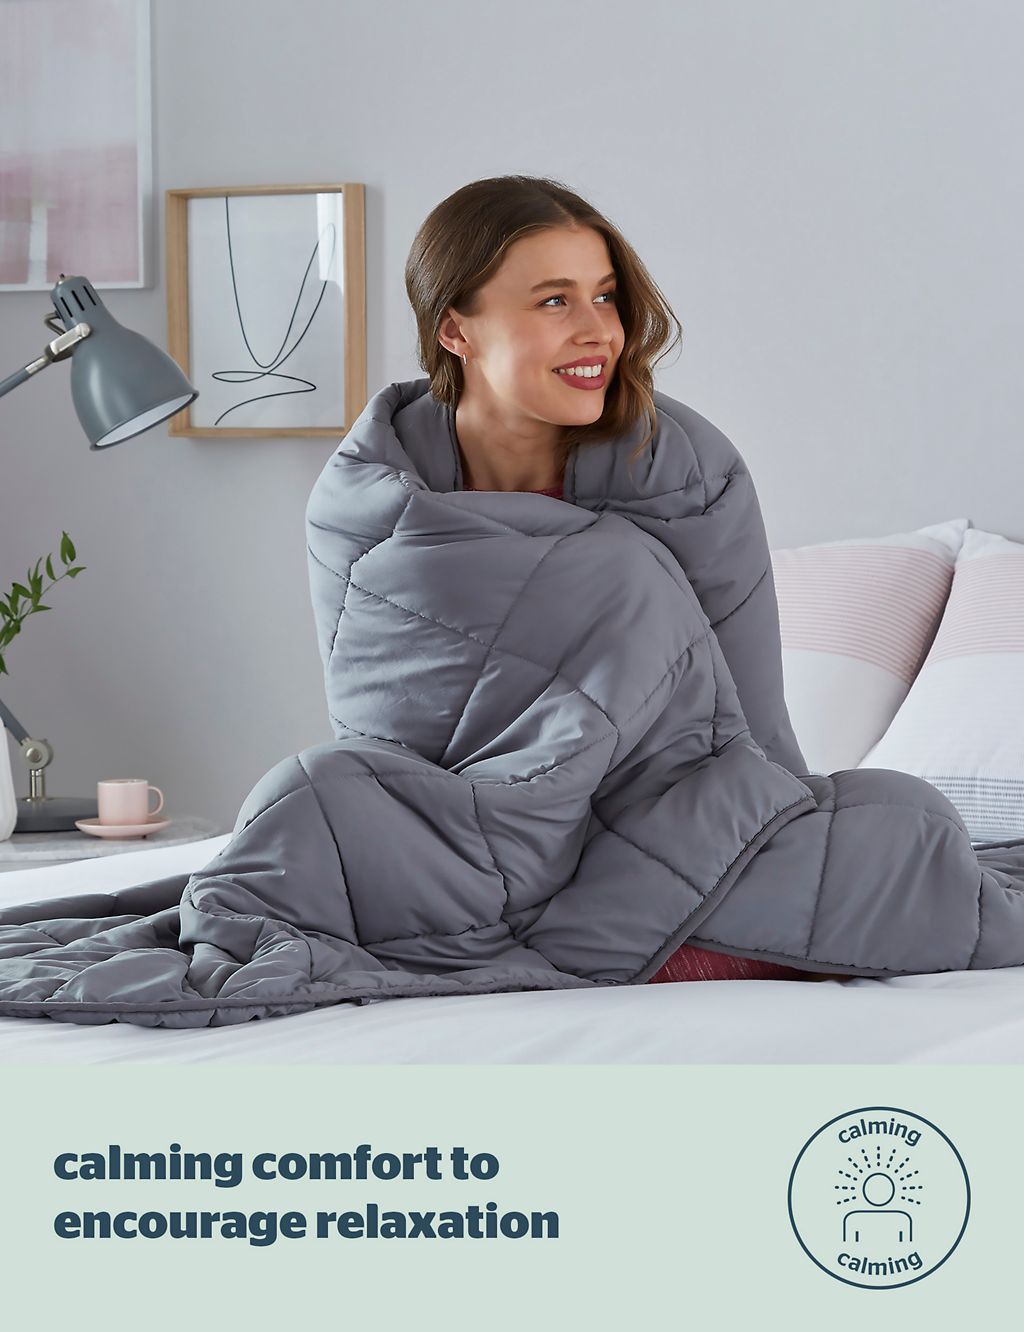 Wellbeing 6kg Weighted Blanket 7 of 7